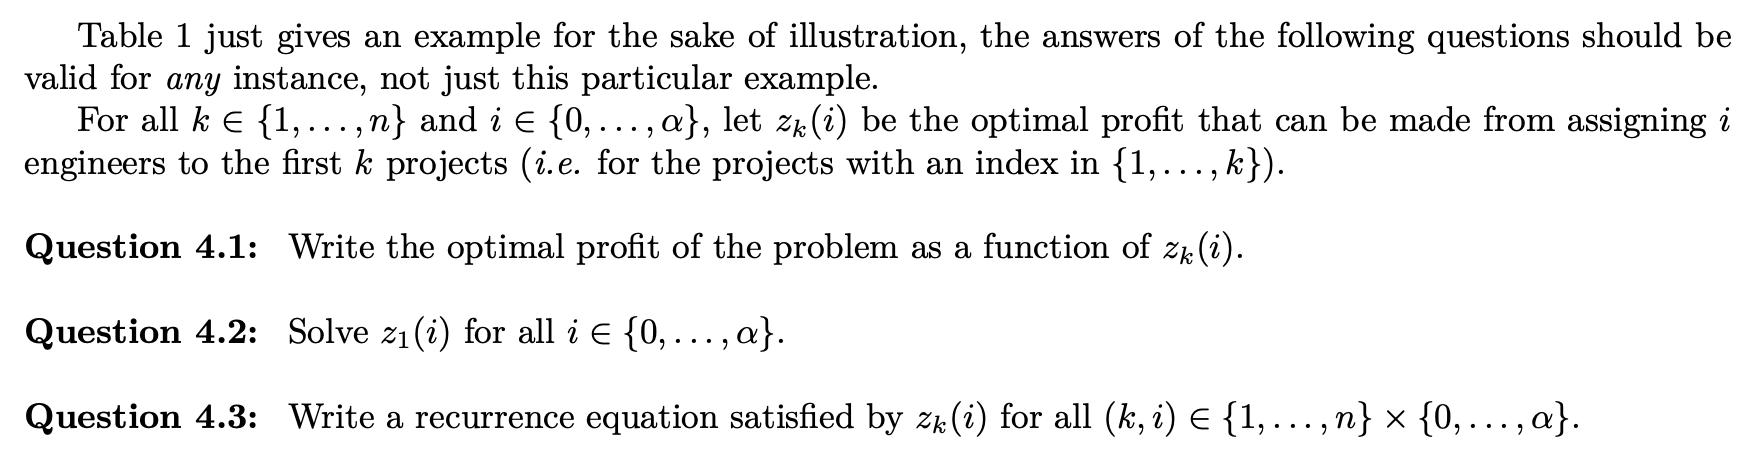 Table 1 just gives an example for the sake of illustration, the answers of the following questions should be